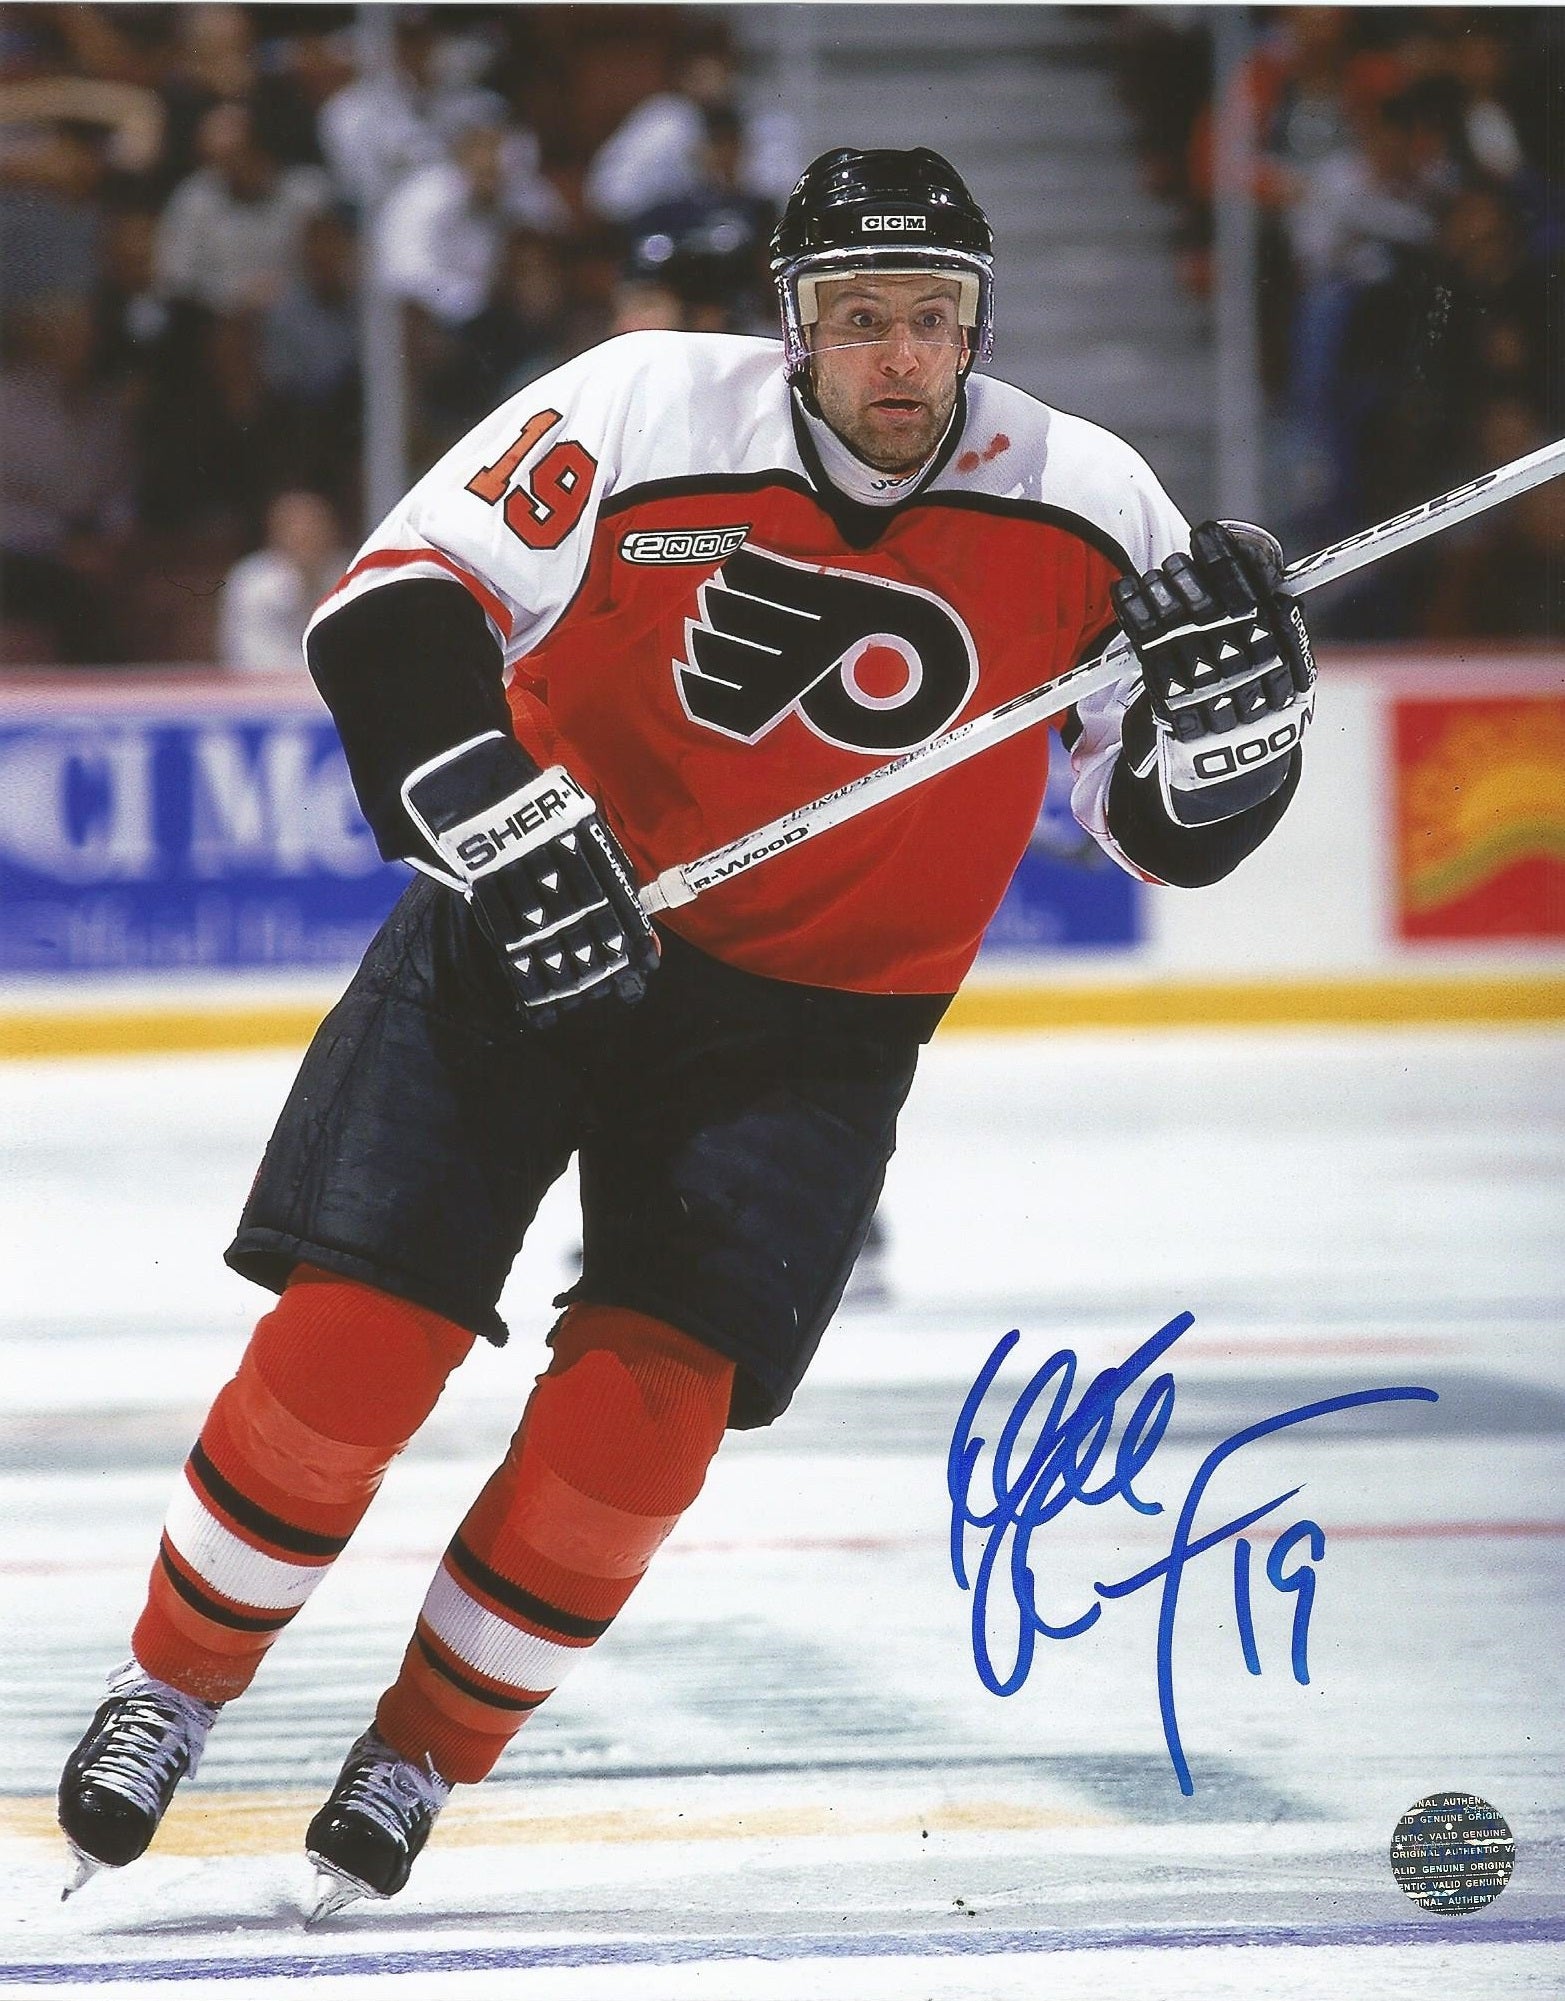 Mikael Renberg Charging Down the Ice Philadelphia Flyers Autographed Hockey Photo - Dynasty Sports & Framing 